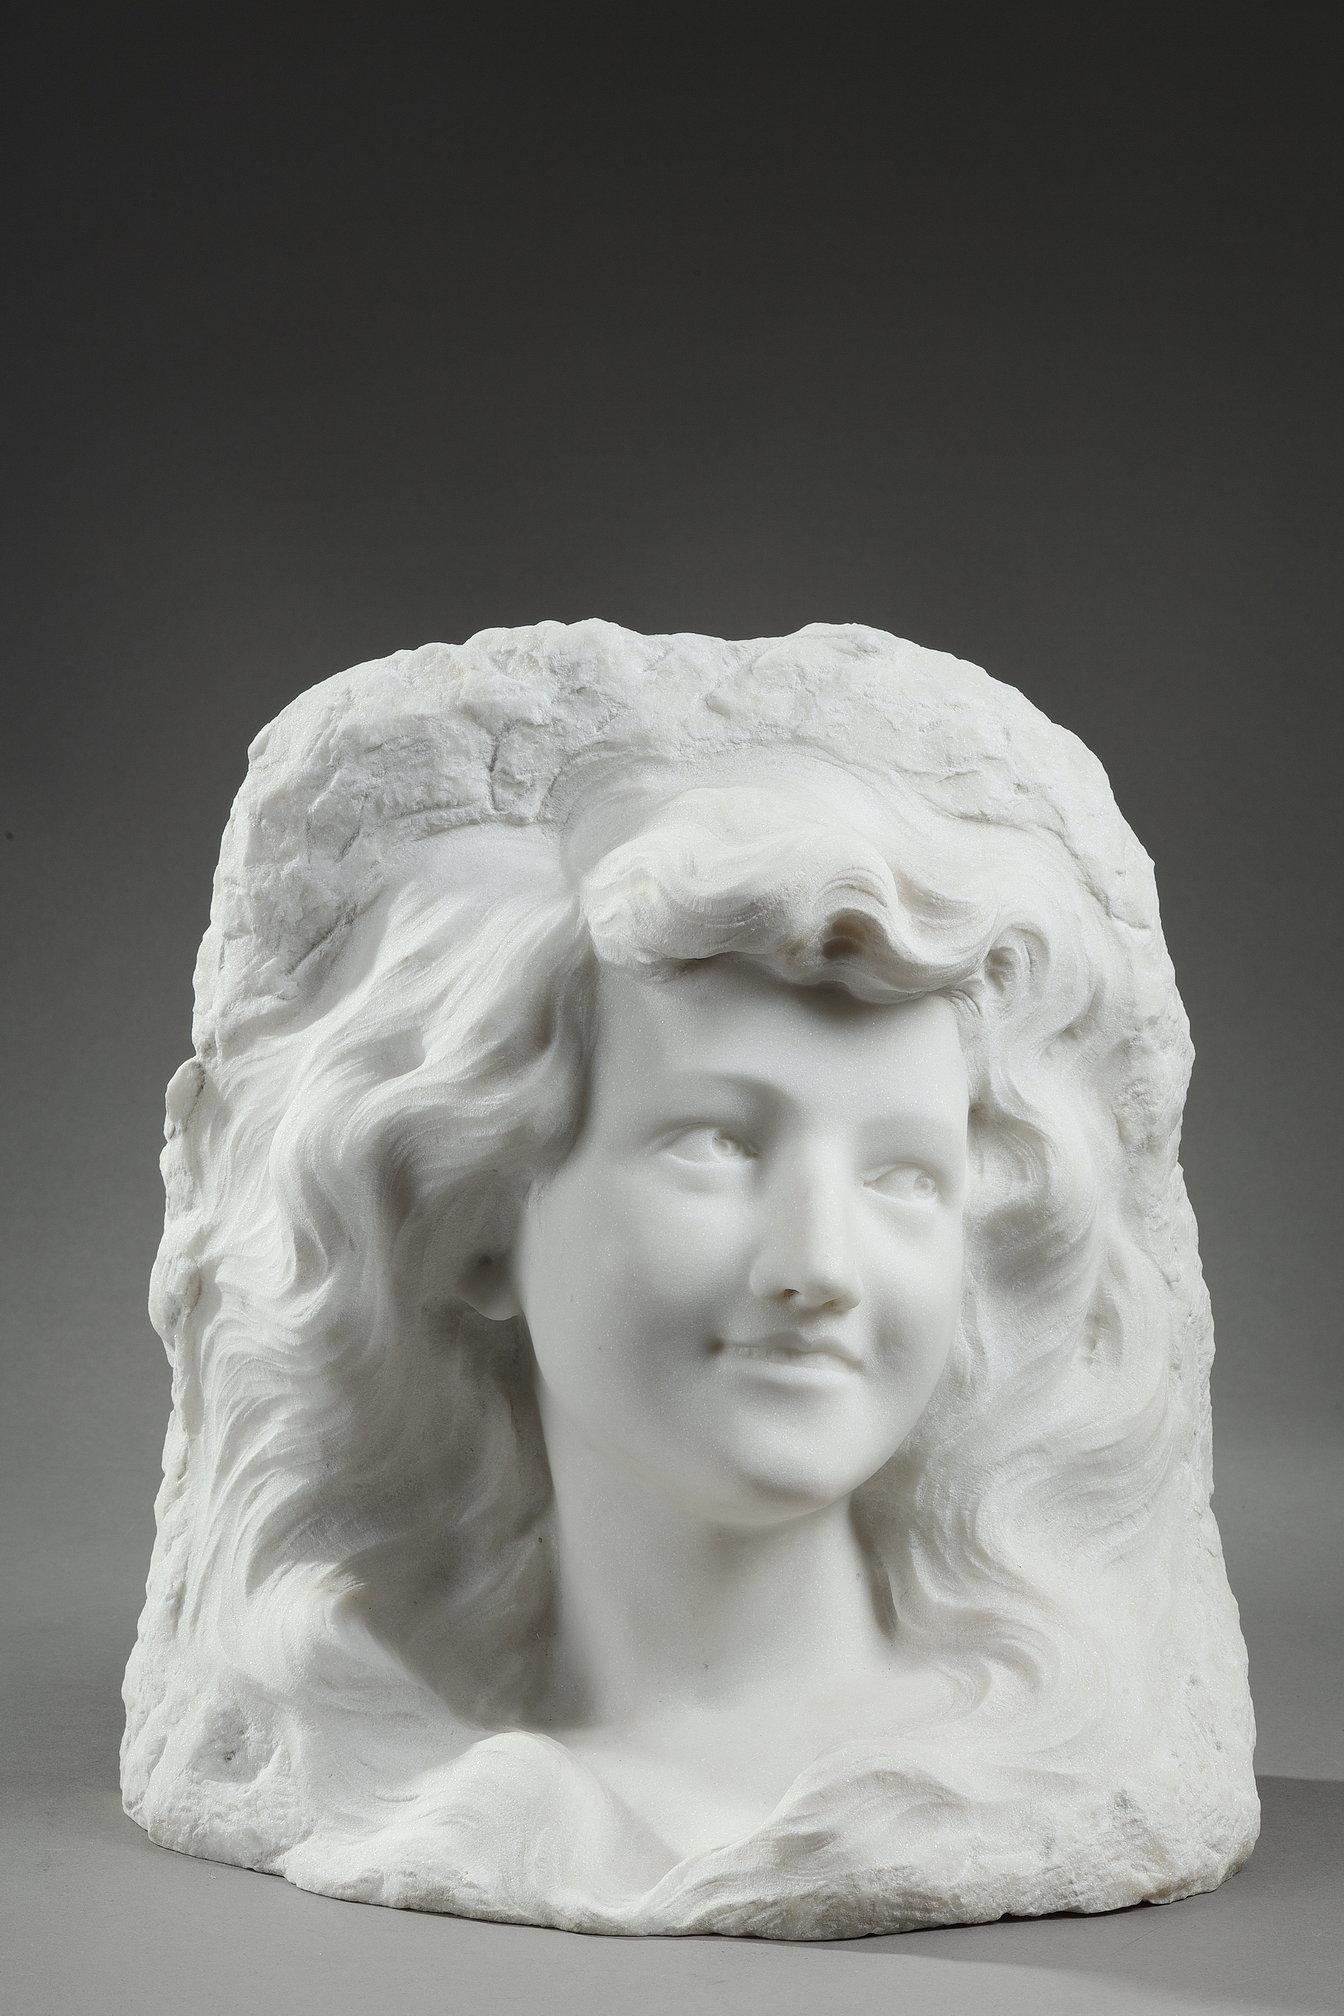 Direct carving of a portrait of a smiling young woman in white Carrara marble from the Art Nouveau period. The sculptor uses a clever technique to bring out the face, allowing the figure to take shape by 